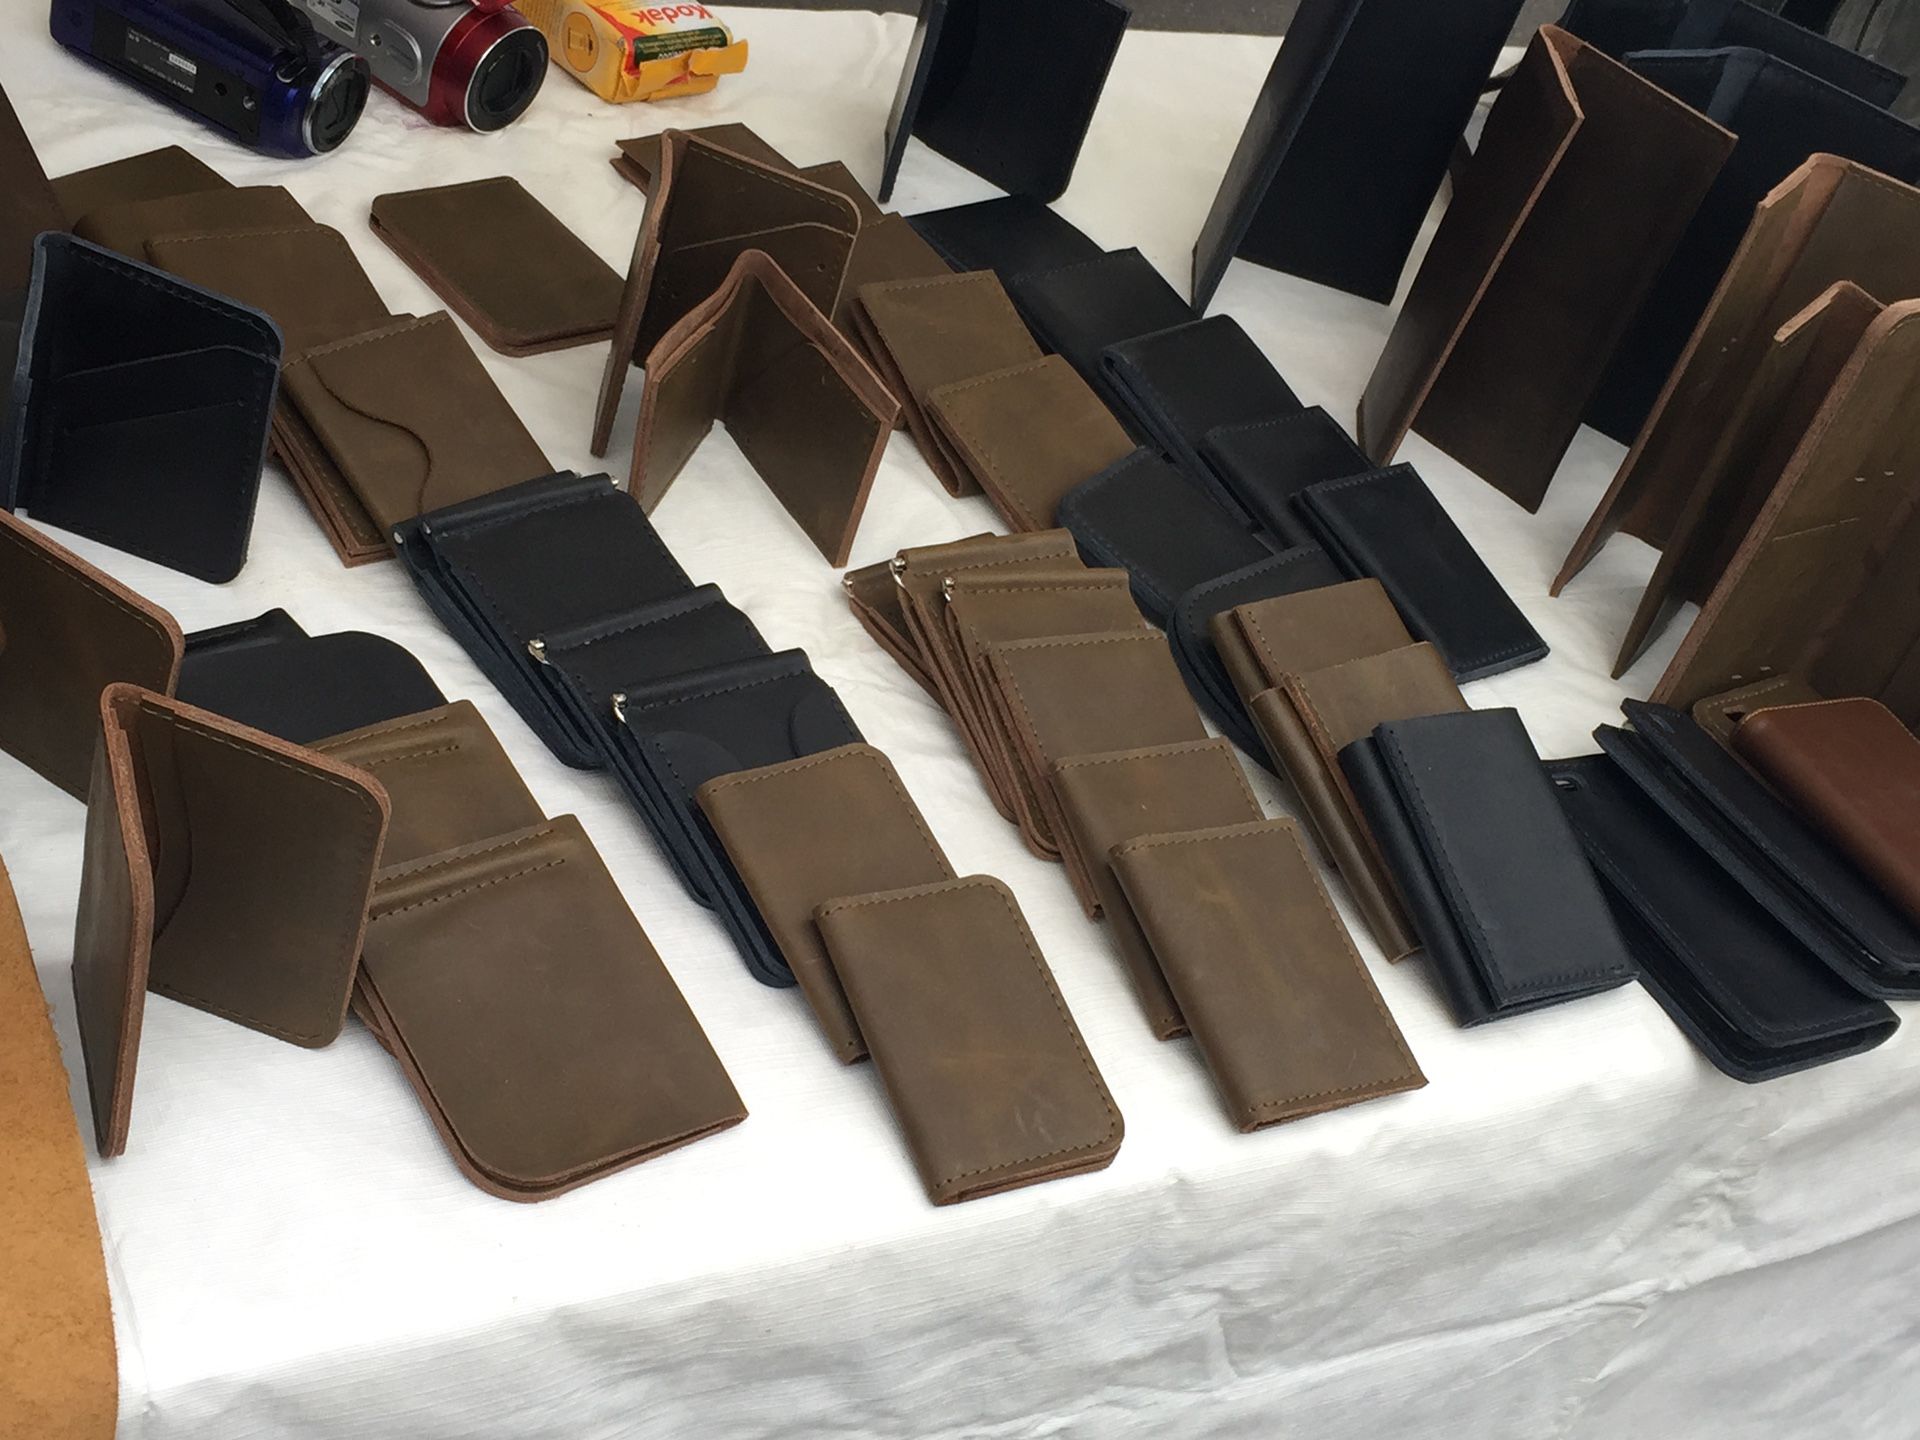 Handmade leather wallets and bracelets 10-15$ genuine leather